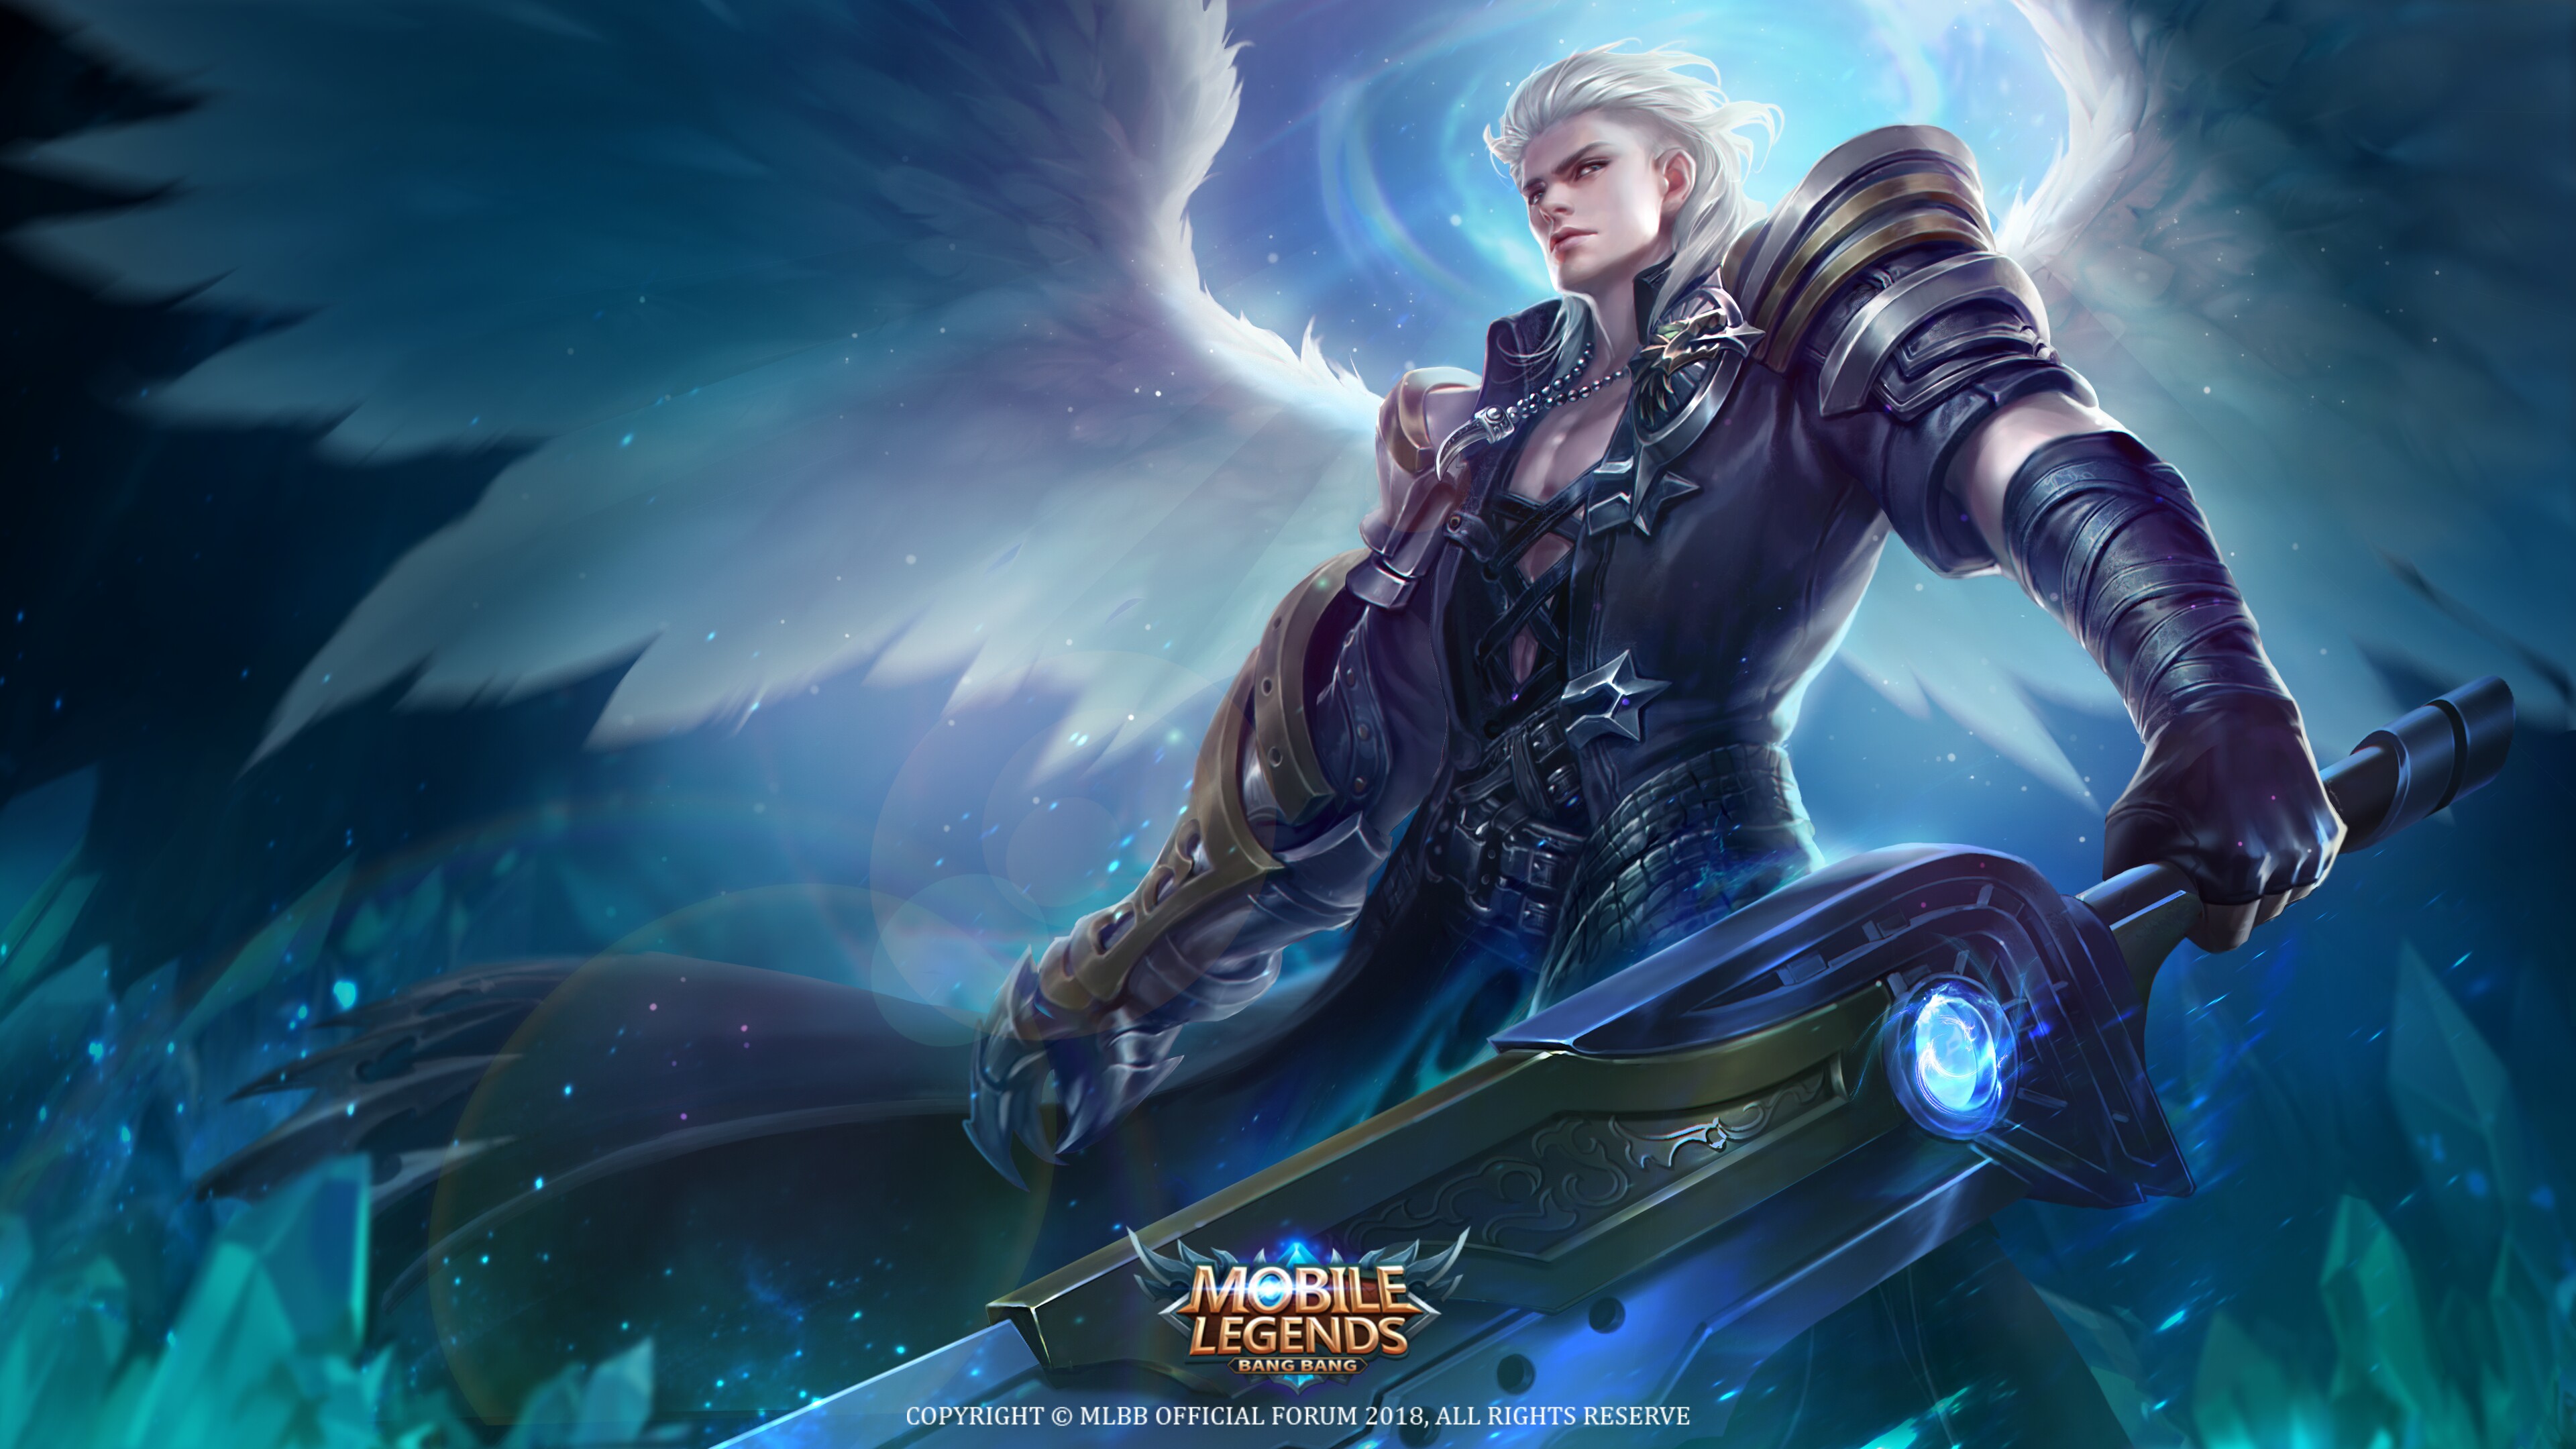 120 Best Mobile Legends Wallpapers Ever Download for Mobile 3840x2160